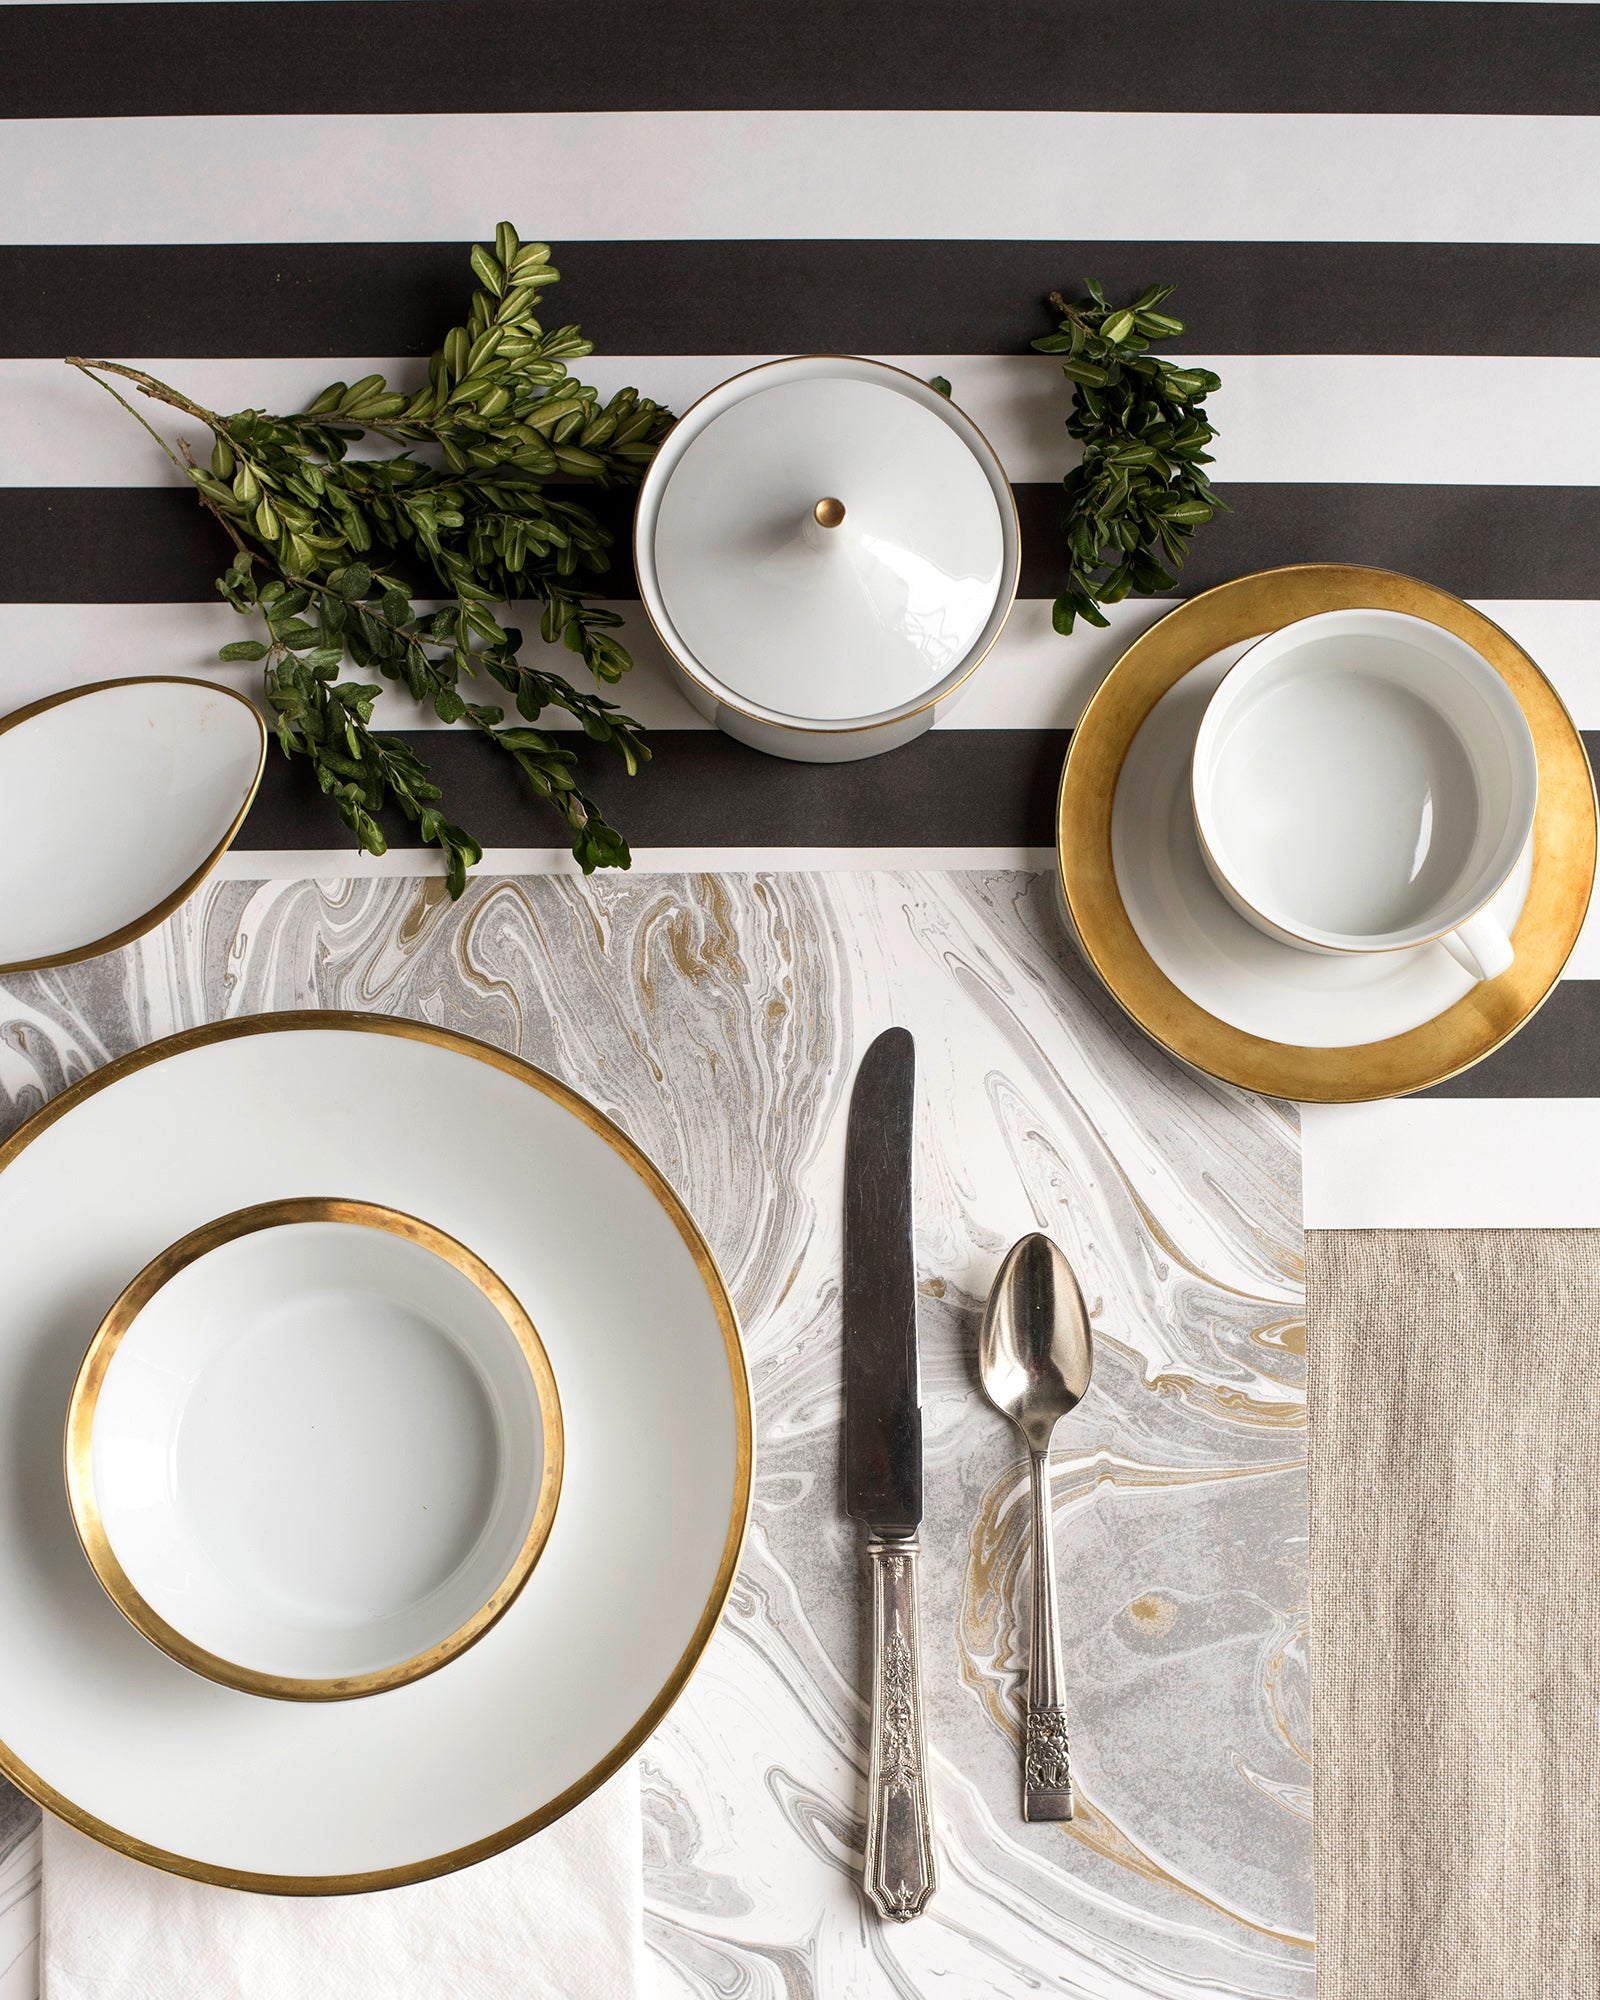 The Black Classic Stripe Runner under an elegant gold-accented place setting, from above.